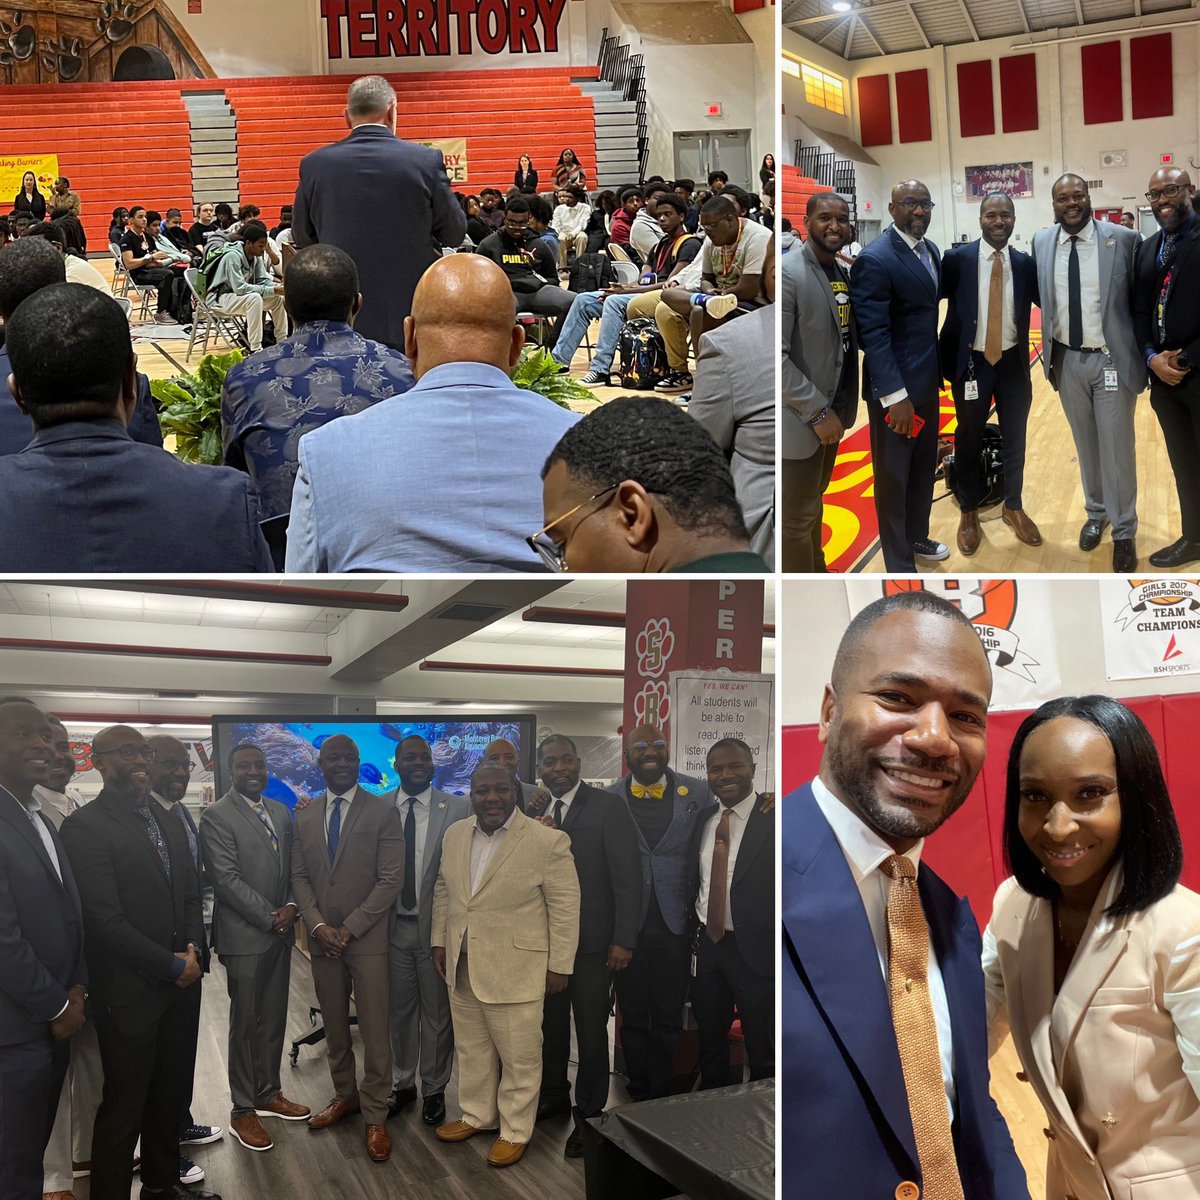 The @southbrowardshs Black Male Symposium was outstanding. Thank you to @Prin_Francois and all of the young kings who engaged in courageous conversations about leadership, kindness, planning for the future, and empowerment. Absolute excellence! #southbrowardhighschool